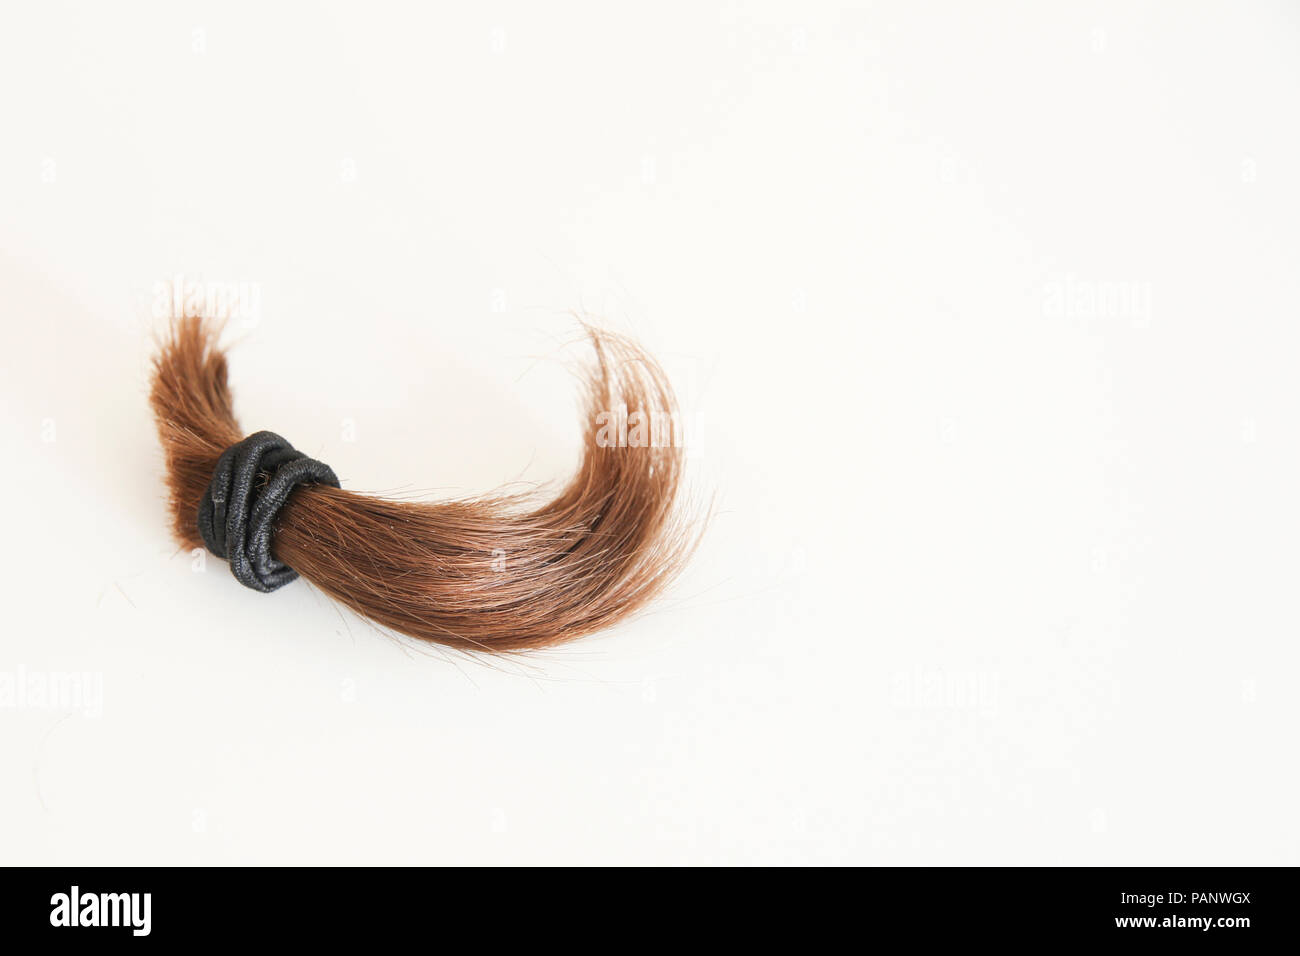 1300 Locks Of Hair Stock Photos Pictures  RoyaltyFree Images  iStock   Strands of hair Beautiful hair Shampoo